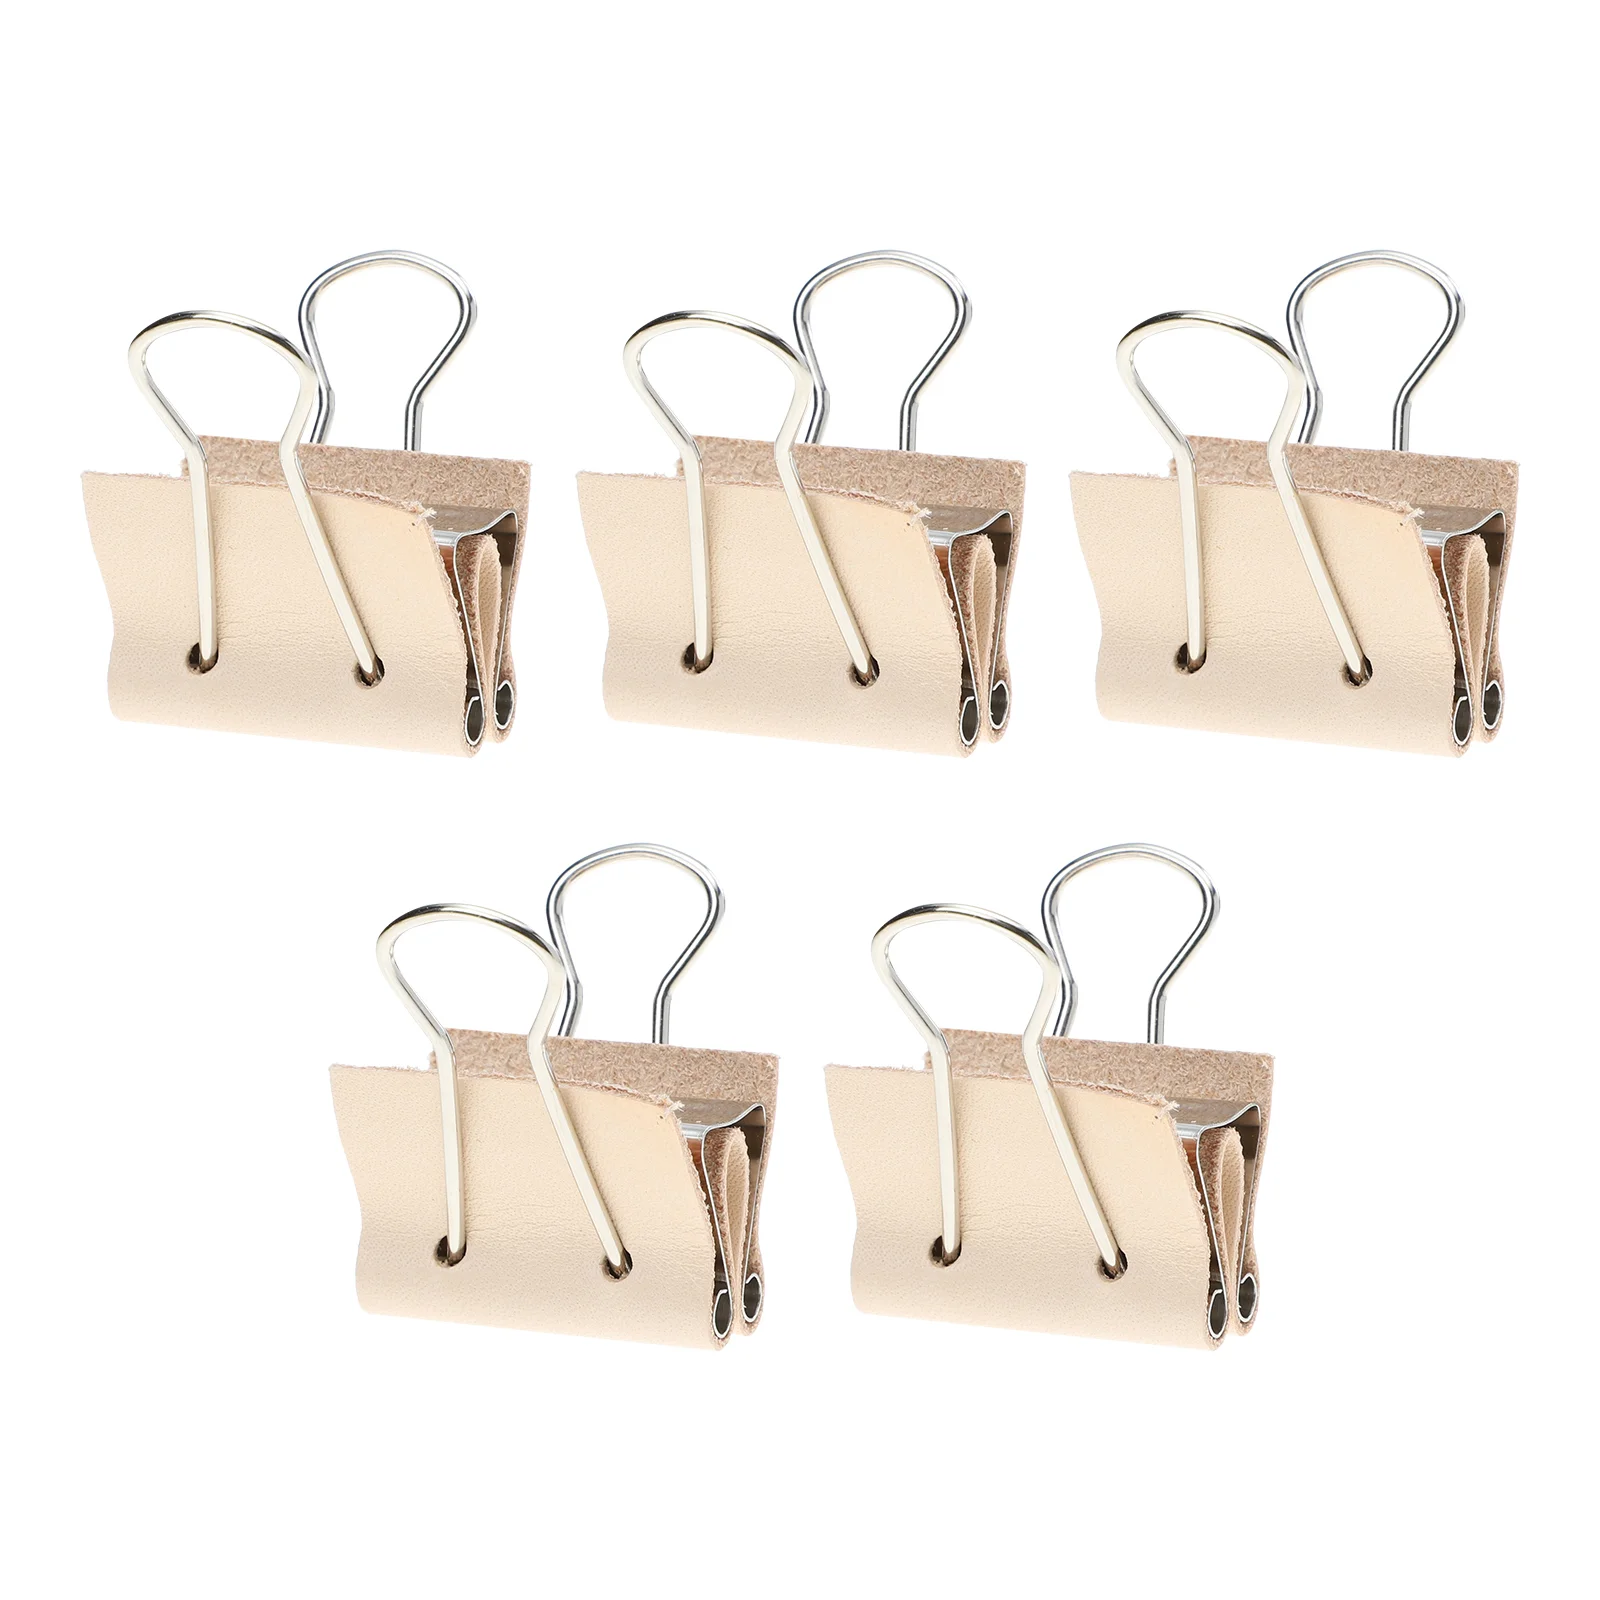 5pcs Binder Clamps DIY Binder Clamps DIY Binder Clamps 5pcs 2 9 inch adjustable nylon mini spring clamps muslin clamps for photo studio backdrops woodworking diy projects